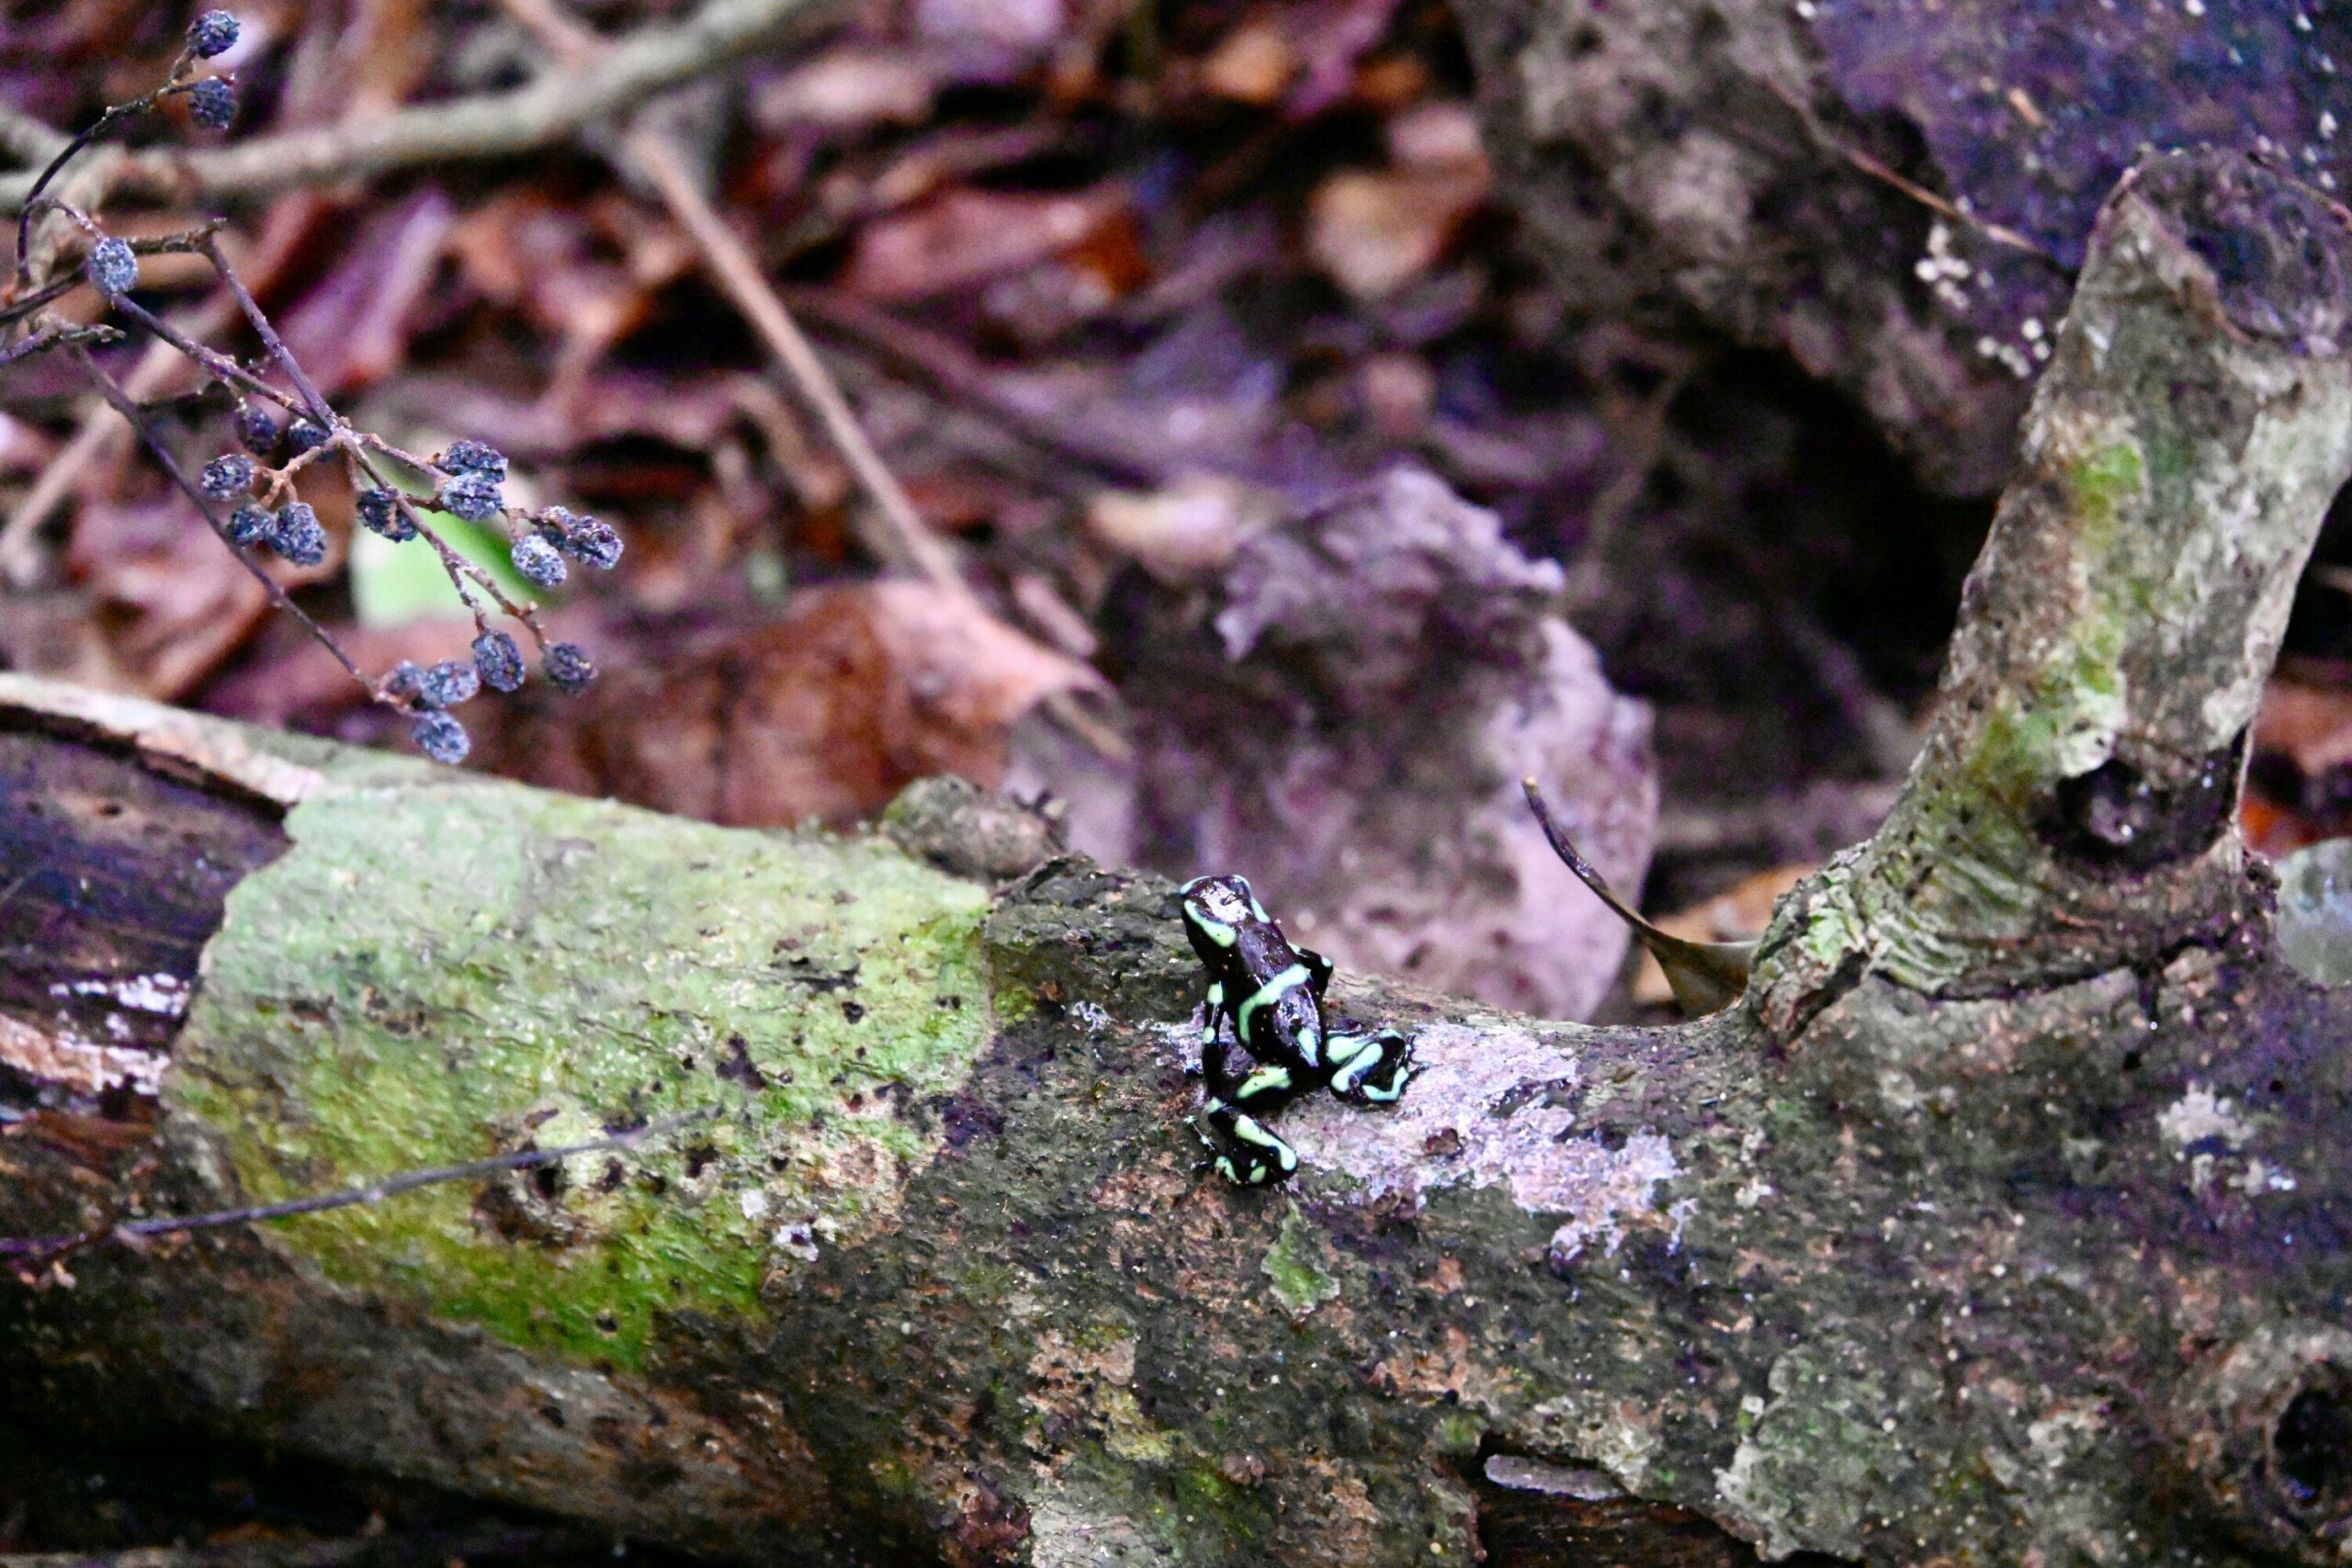 A vibrantly colored poison dart frog perched on a moss-covered branch in the dense undergrowth of Carara National Park.